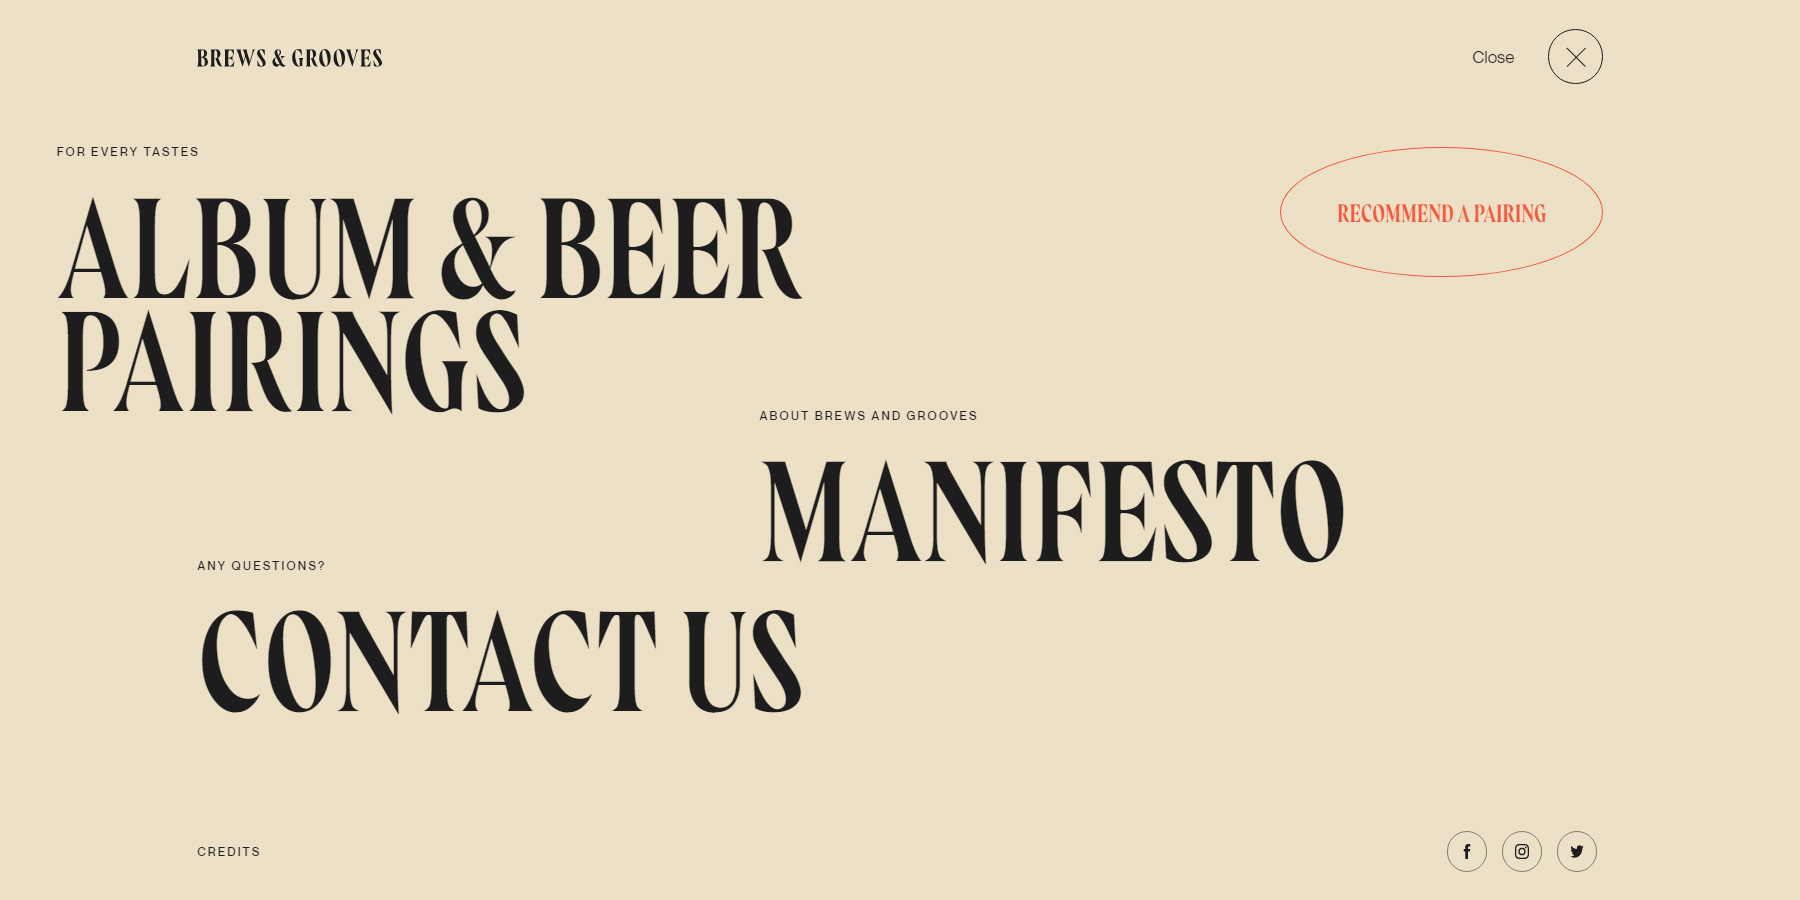 Brews and Grooves - Website of the Day